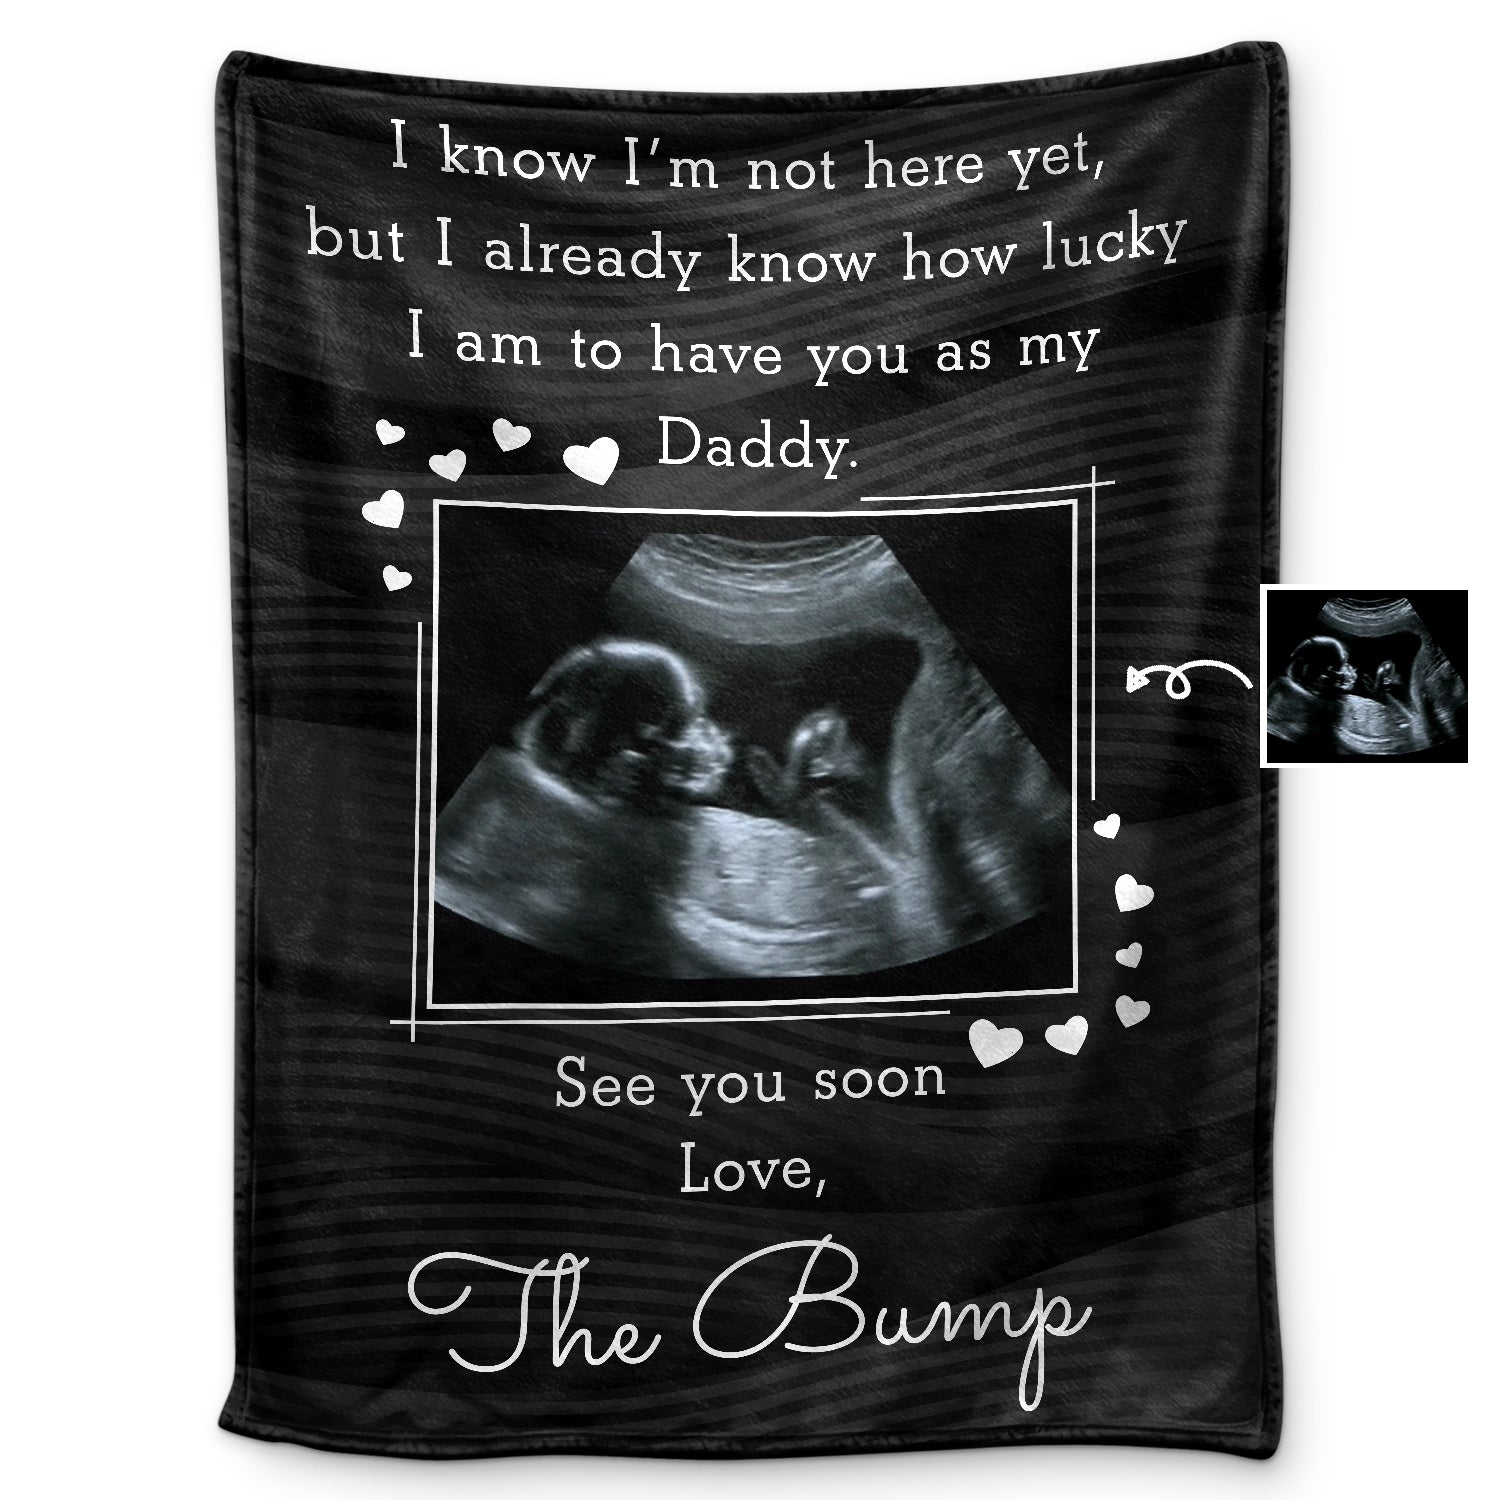 Custom Photo I Know I'm Not Here Yet - Gift For Dad, Father, New Parents - Personalized Fleece Blanket, Sherpa Blanket